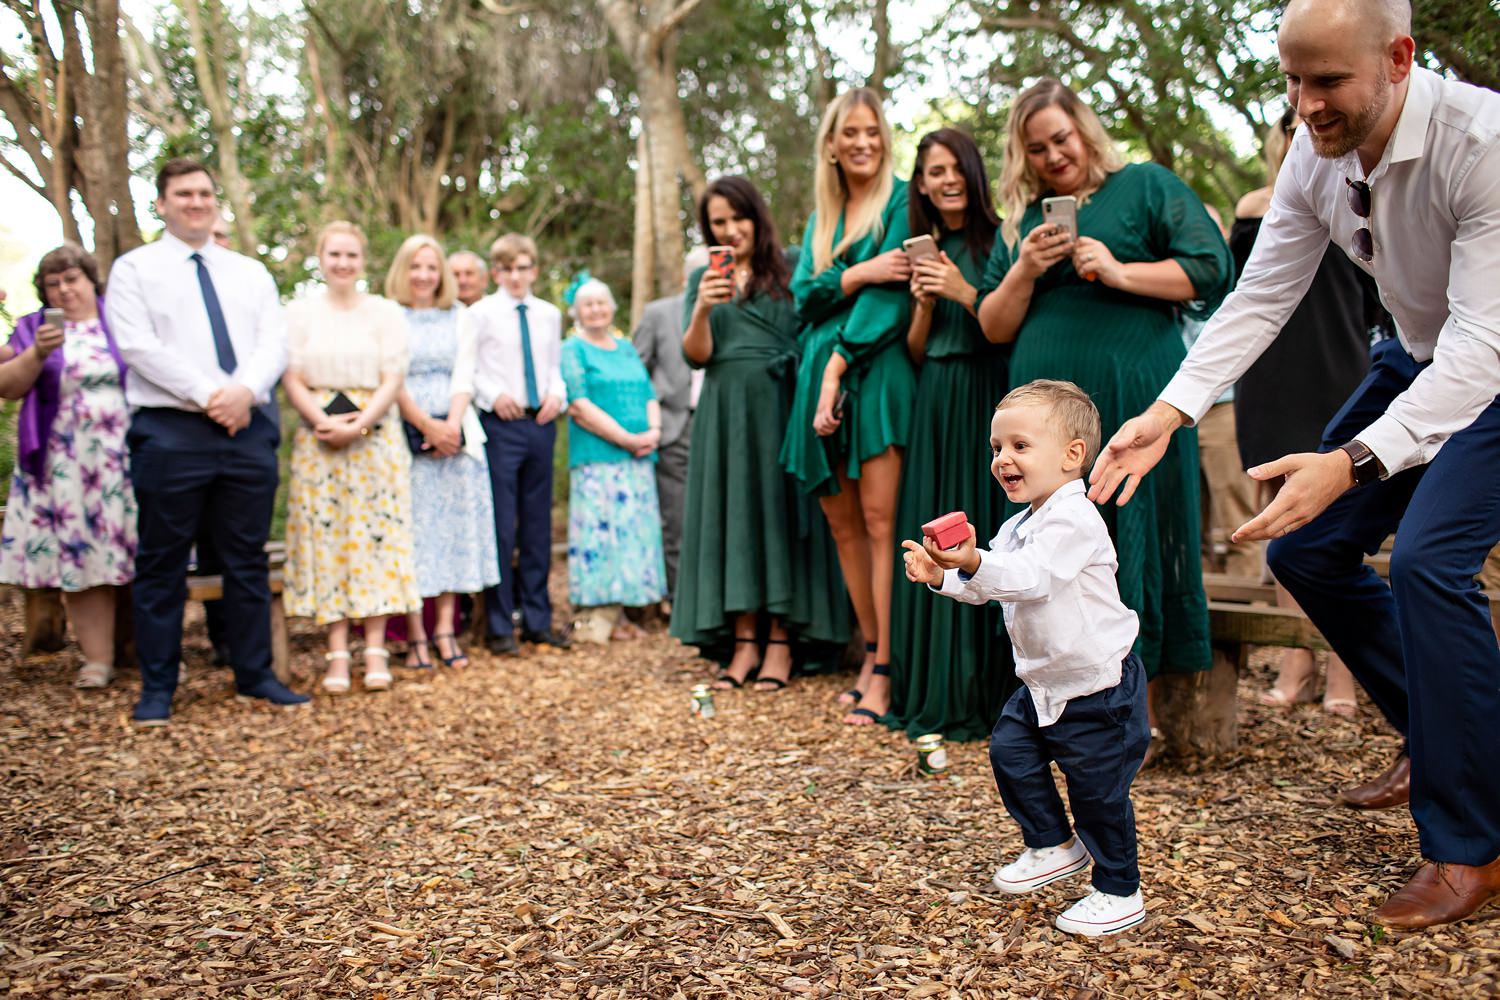 A toddler ringbearer excitedly walks towards the bride and groom with the ring box as smiling wedding guests look on at a forest wedding ceremony in South Africa